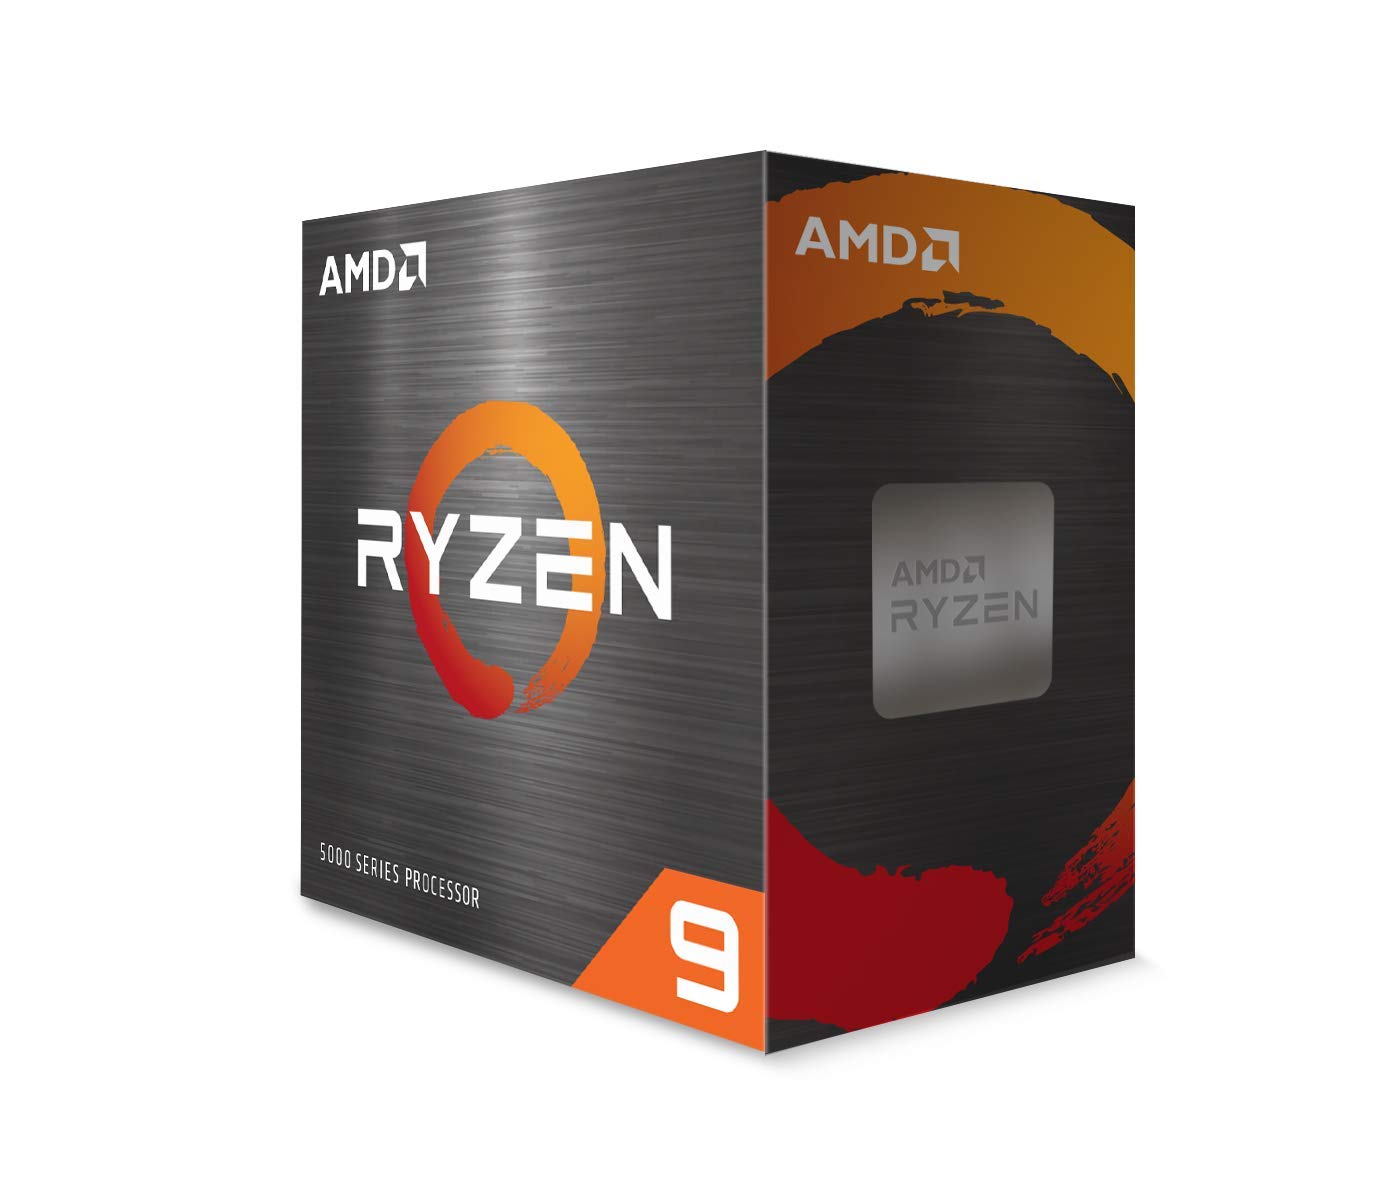 AMD Ryzen 9 5950X Processor with 16 Cores and 32 Threads, 4.9GHz Max Boost Clock, 64MB L3 Cache, 105W TDP, and 7nm FinFET Technology